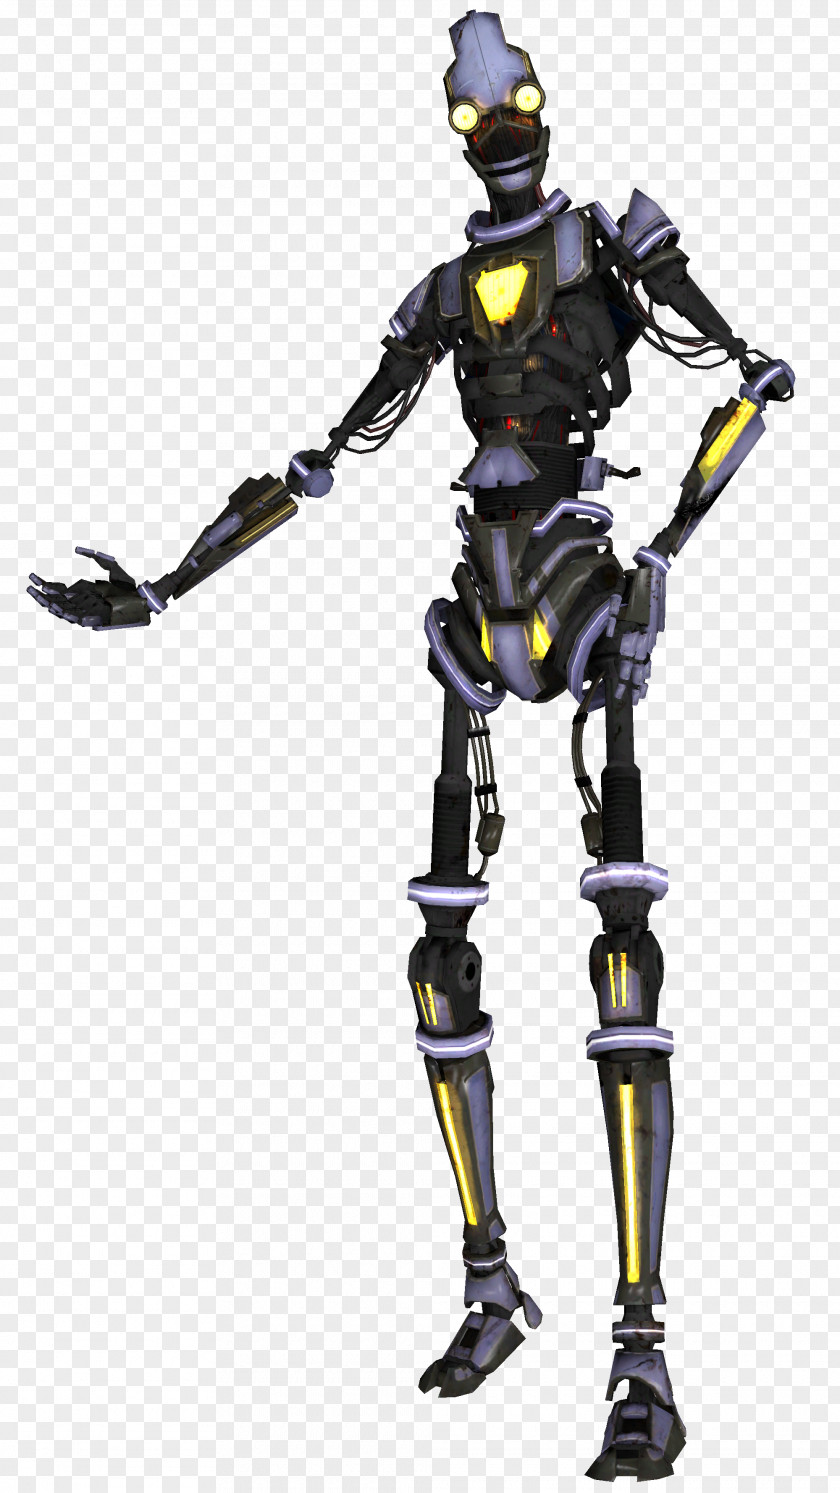 Iron Giant Star Wars: The Force Unleashed Clone Wars General Grievous Droid PNG